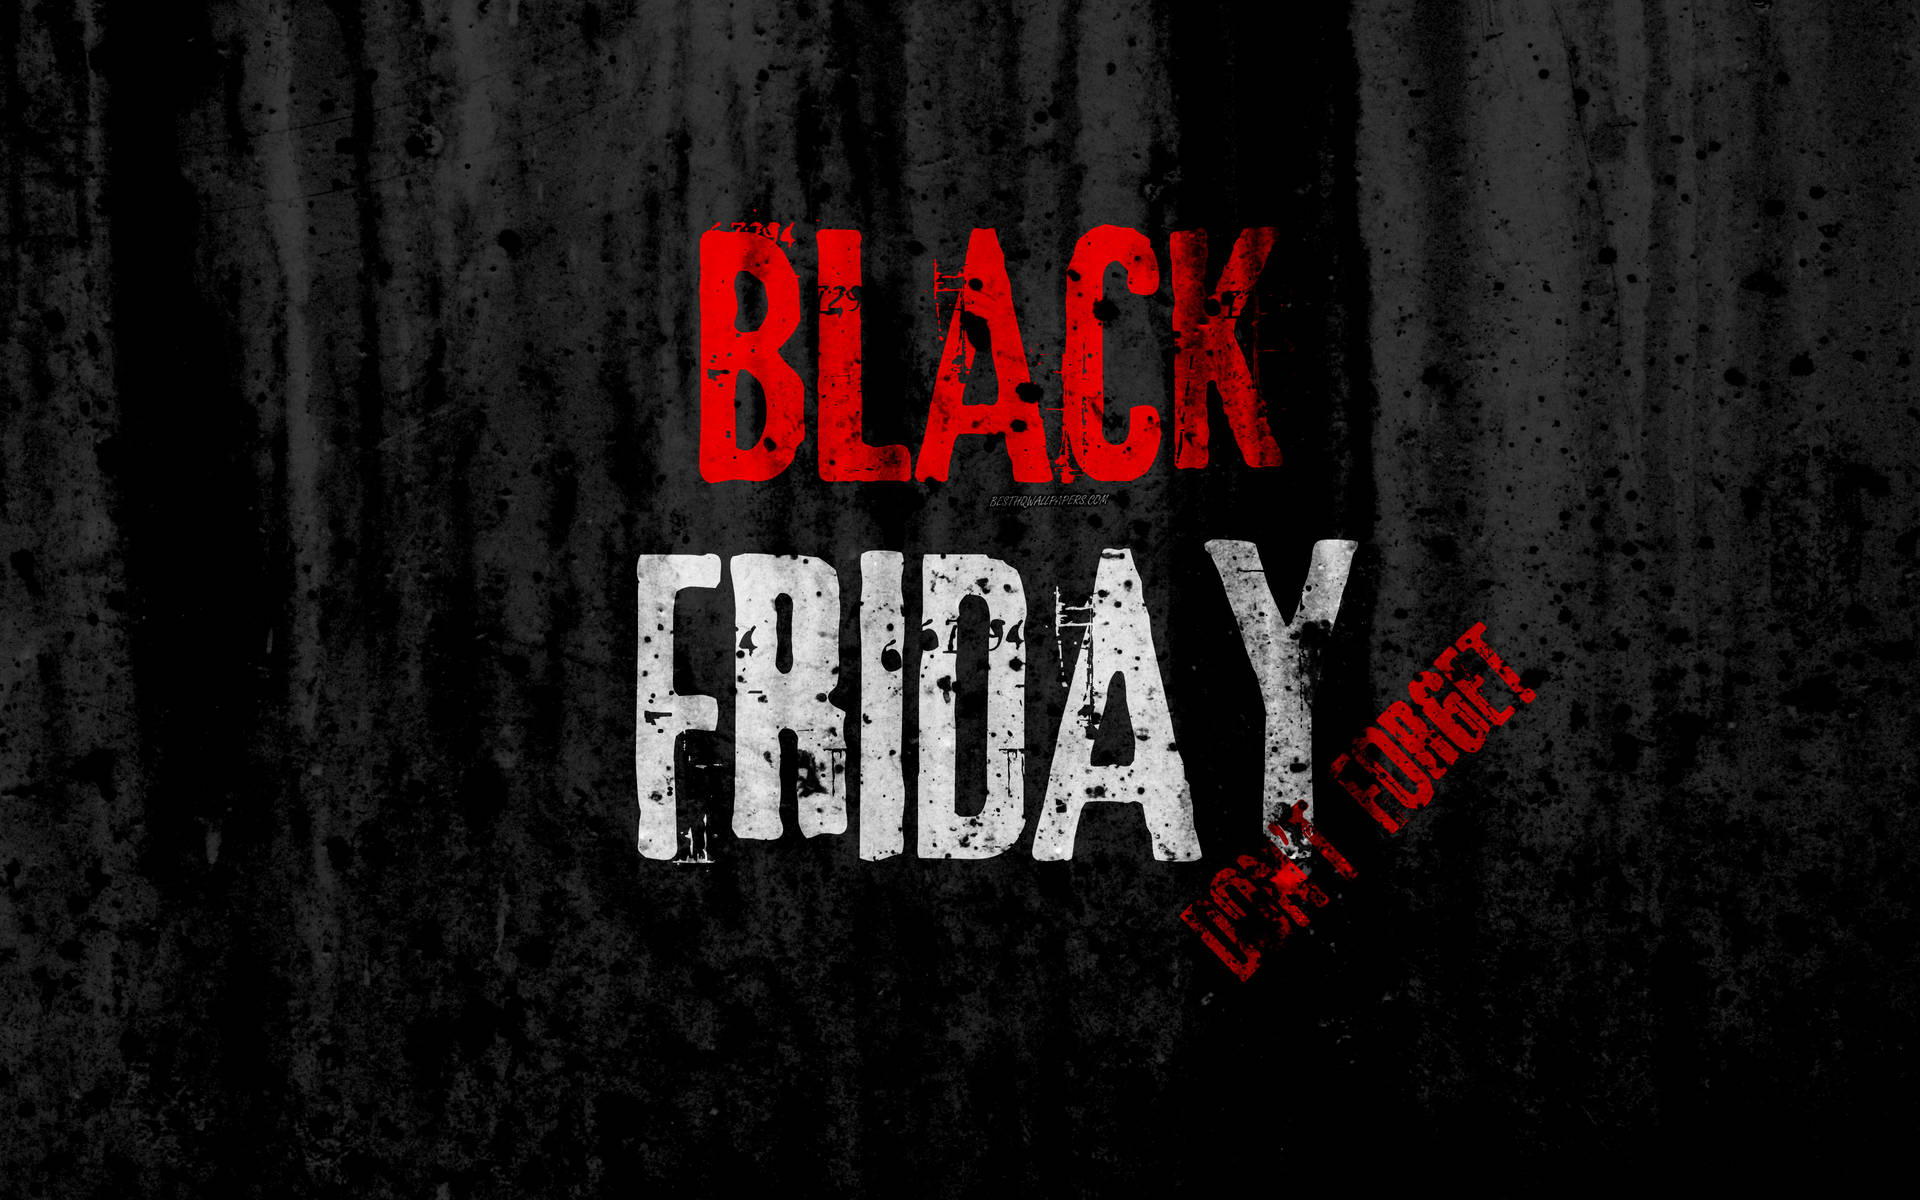 Excitement Of Black Friday Deals Unveiled In Striking Grunge Poster